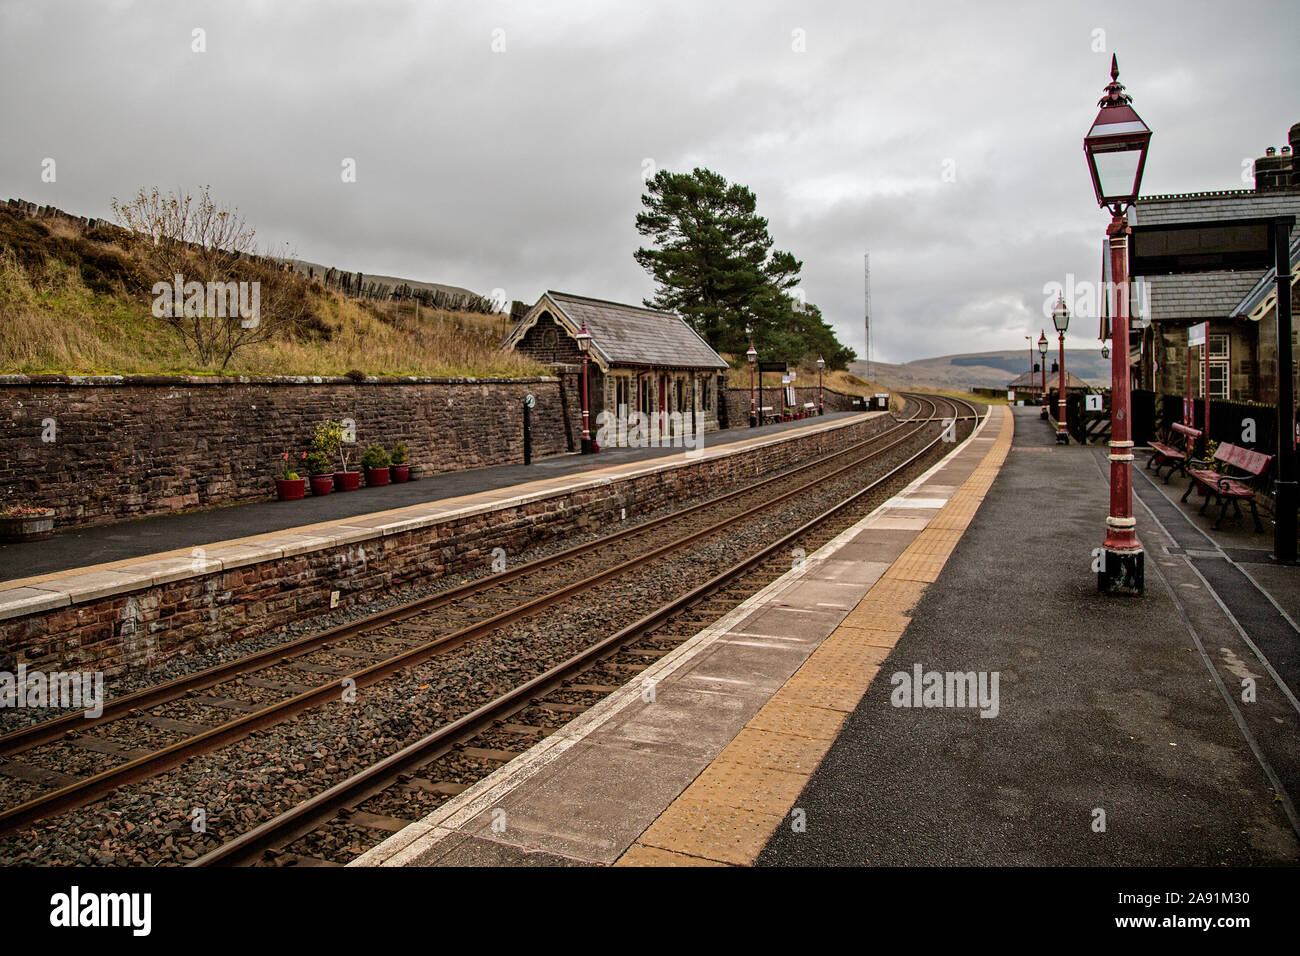 Dent Railway Station, Cowgill, South Lakeland District of Cumbria, the highest above sea level in England at 1150 feet Stock Photo